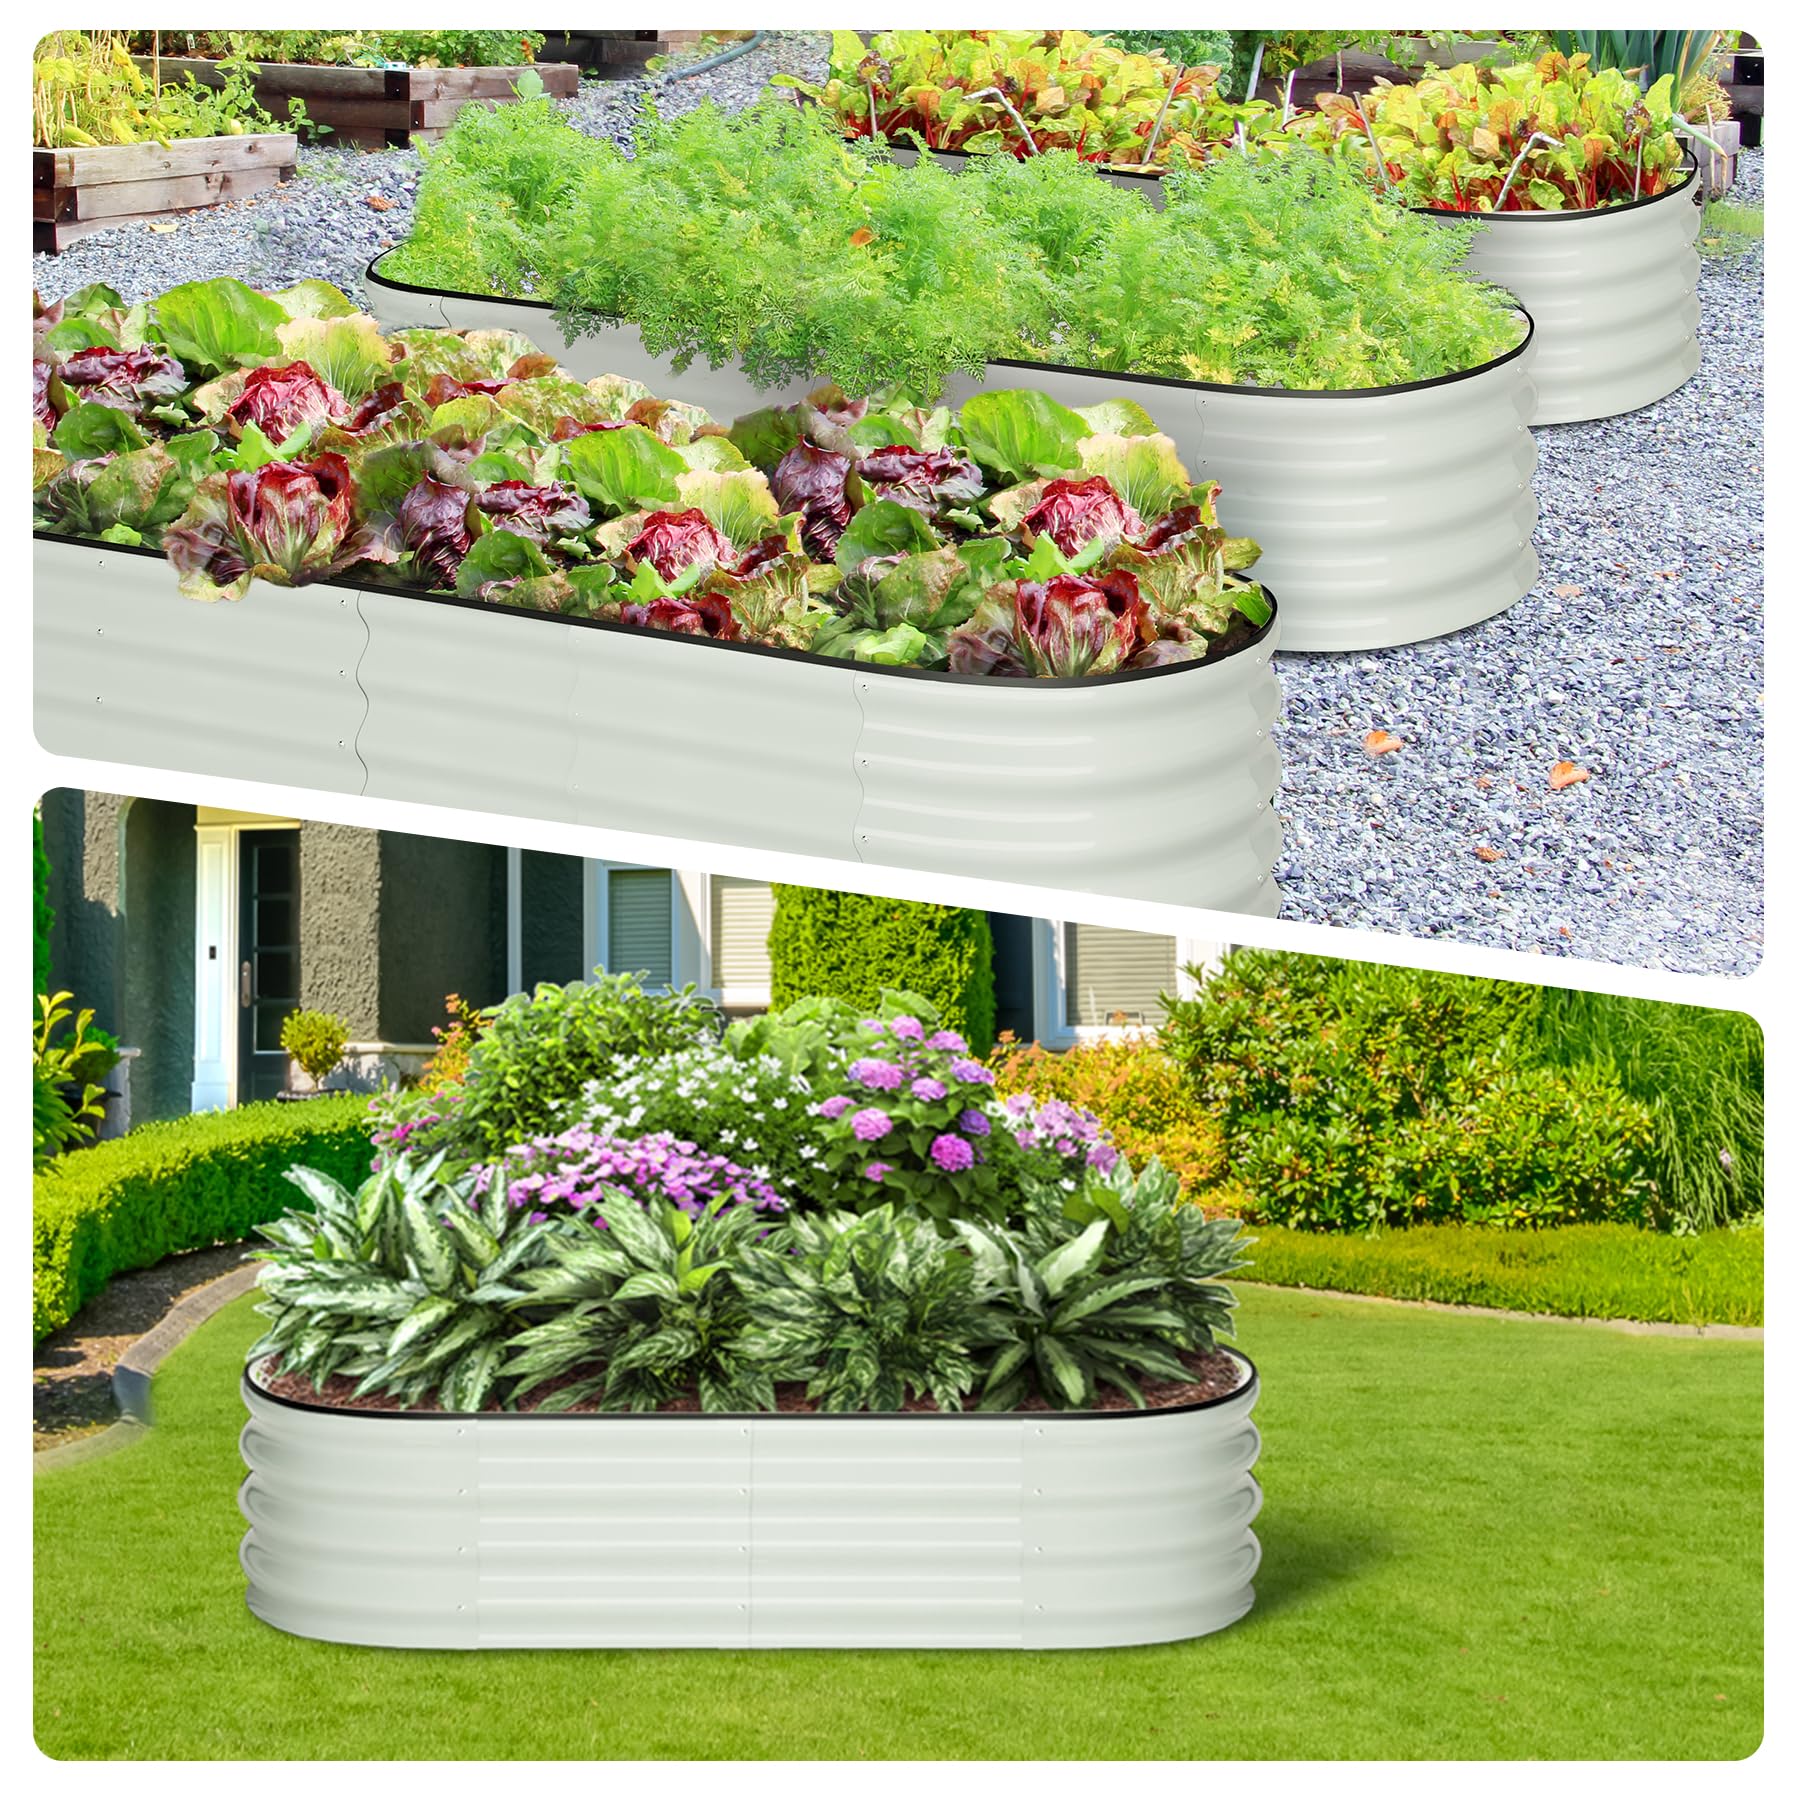 2 Pcs 4.5x2x1ft Galvanized Raised Garden Bed Outdoor,Planters for Outdoor Plants,Open-Ended Base Planter Raised Boxes,Oval Metal Planter Box for Vegetables, Flowers, Fruits,Rubber Edge